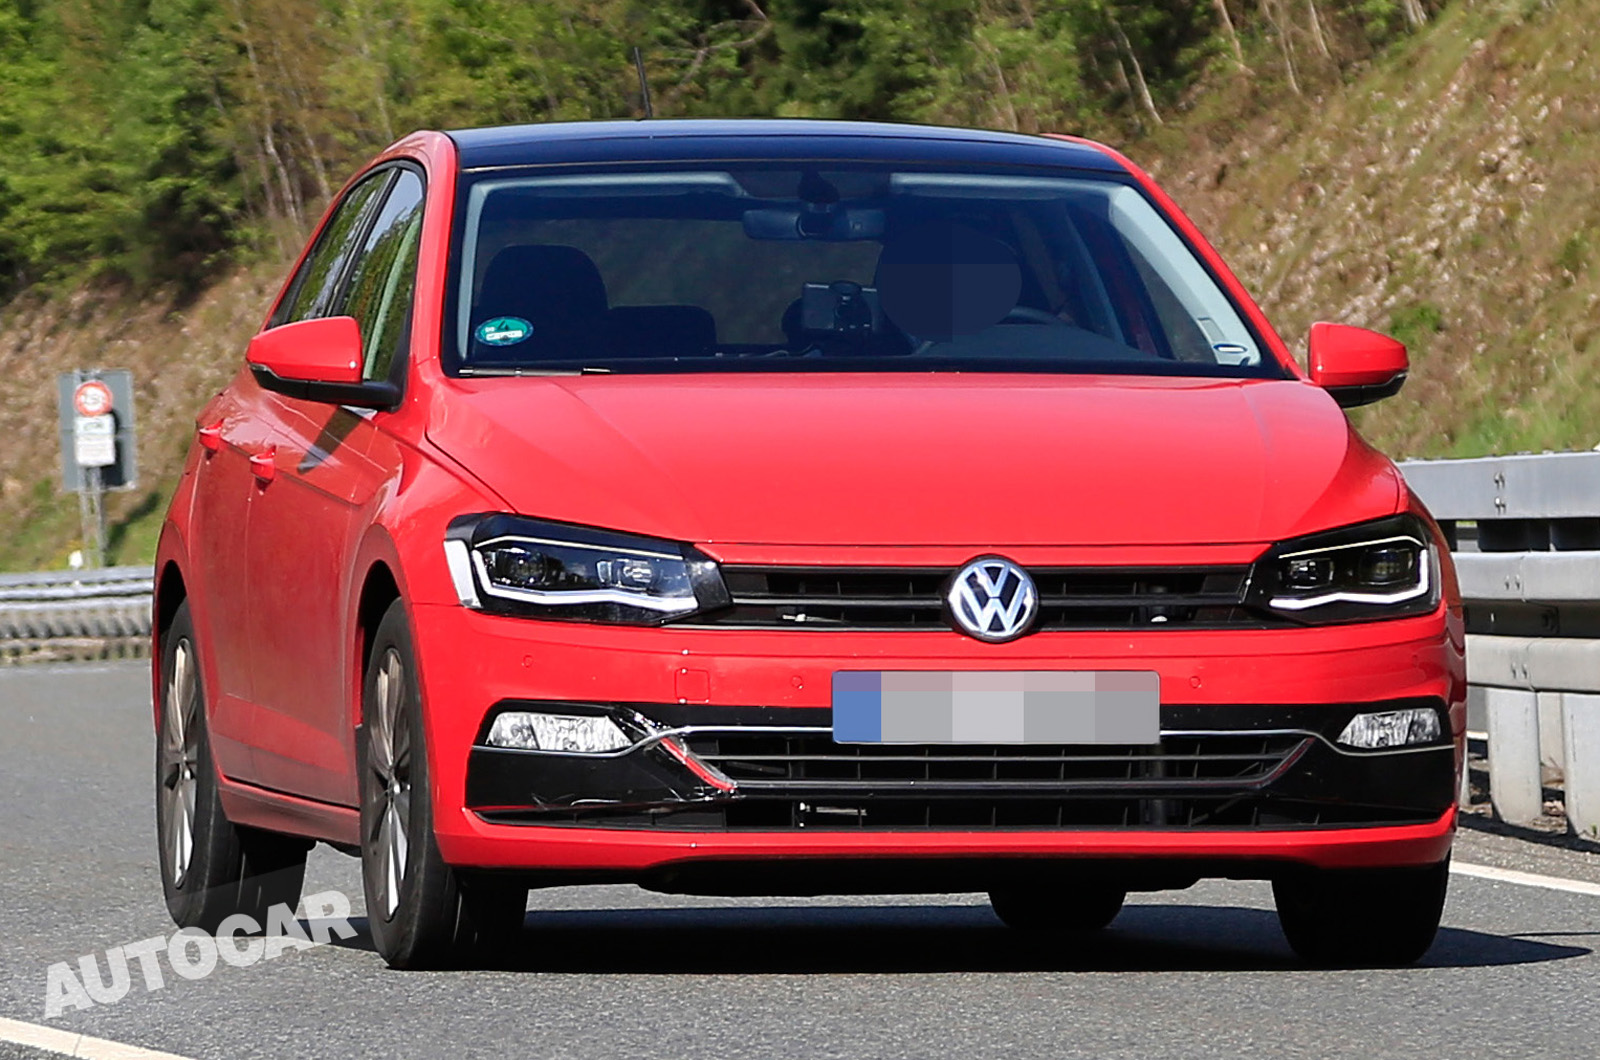 New Volkswagen Polo to be revealed on 16 June